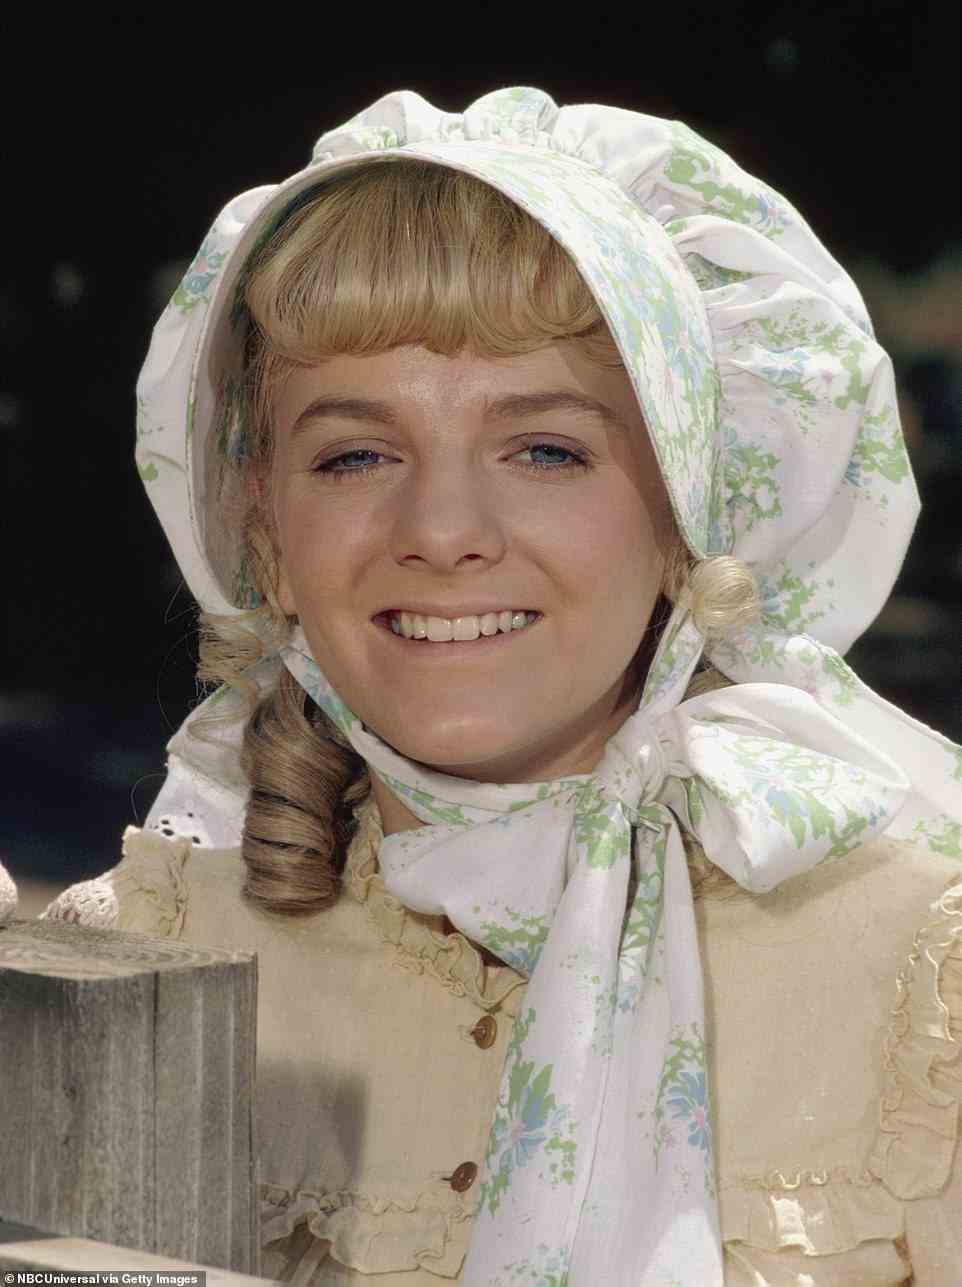 Alison Arngrim, 60, was born in New York City on January 18, 1962. She started her career as a model and then began appearing in various commercials. Her first major role was that of Nellie Oleson in Little House on the Prairie (pictured)